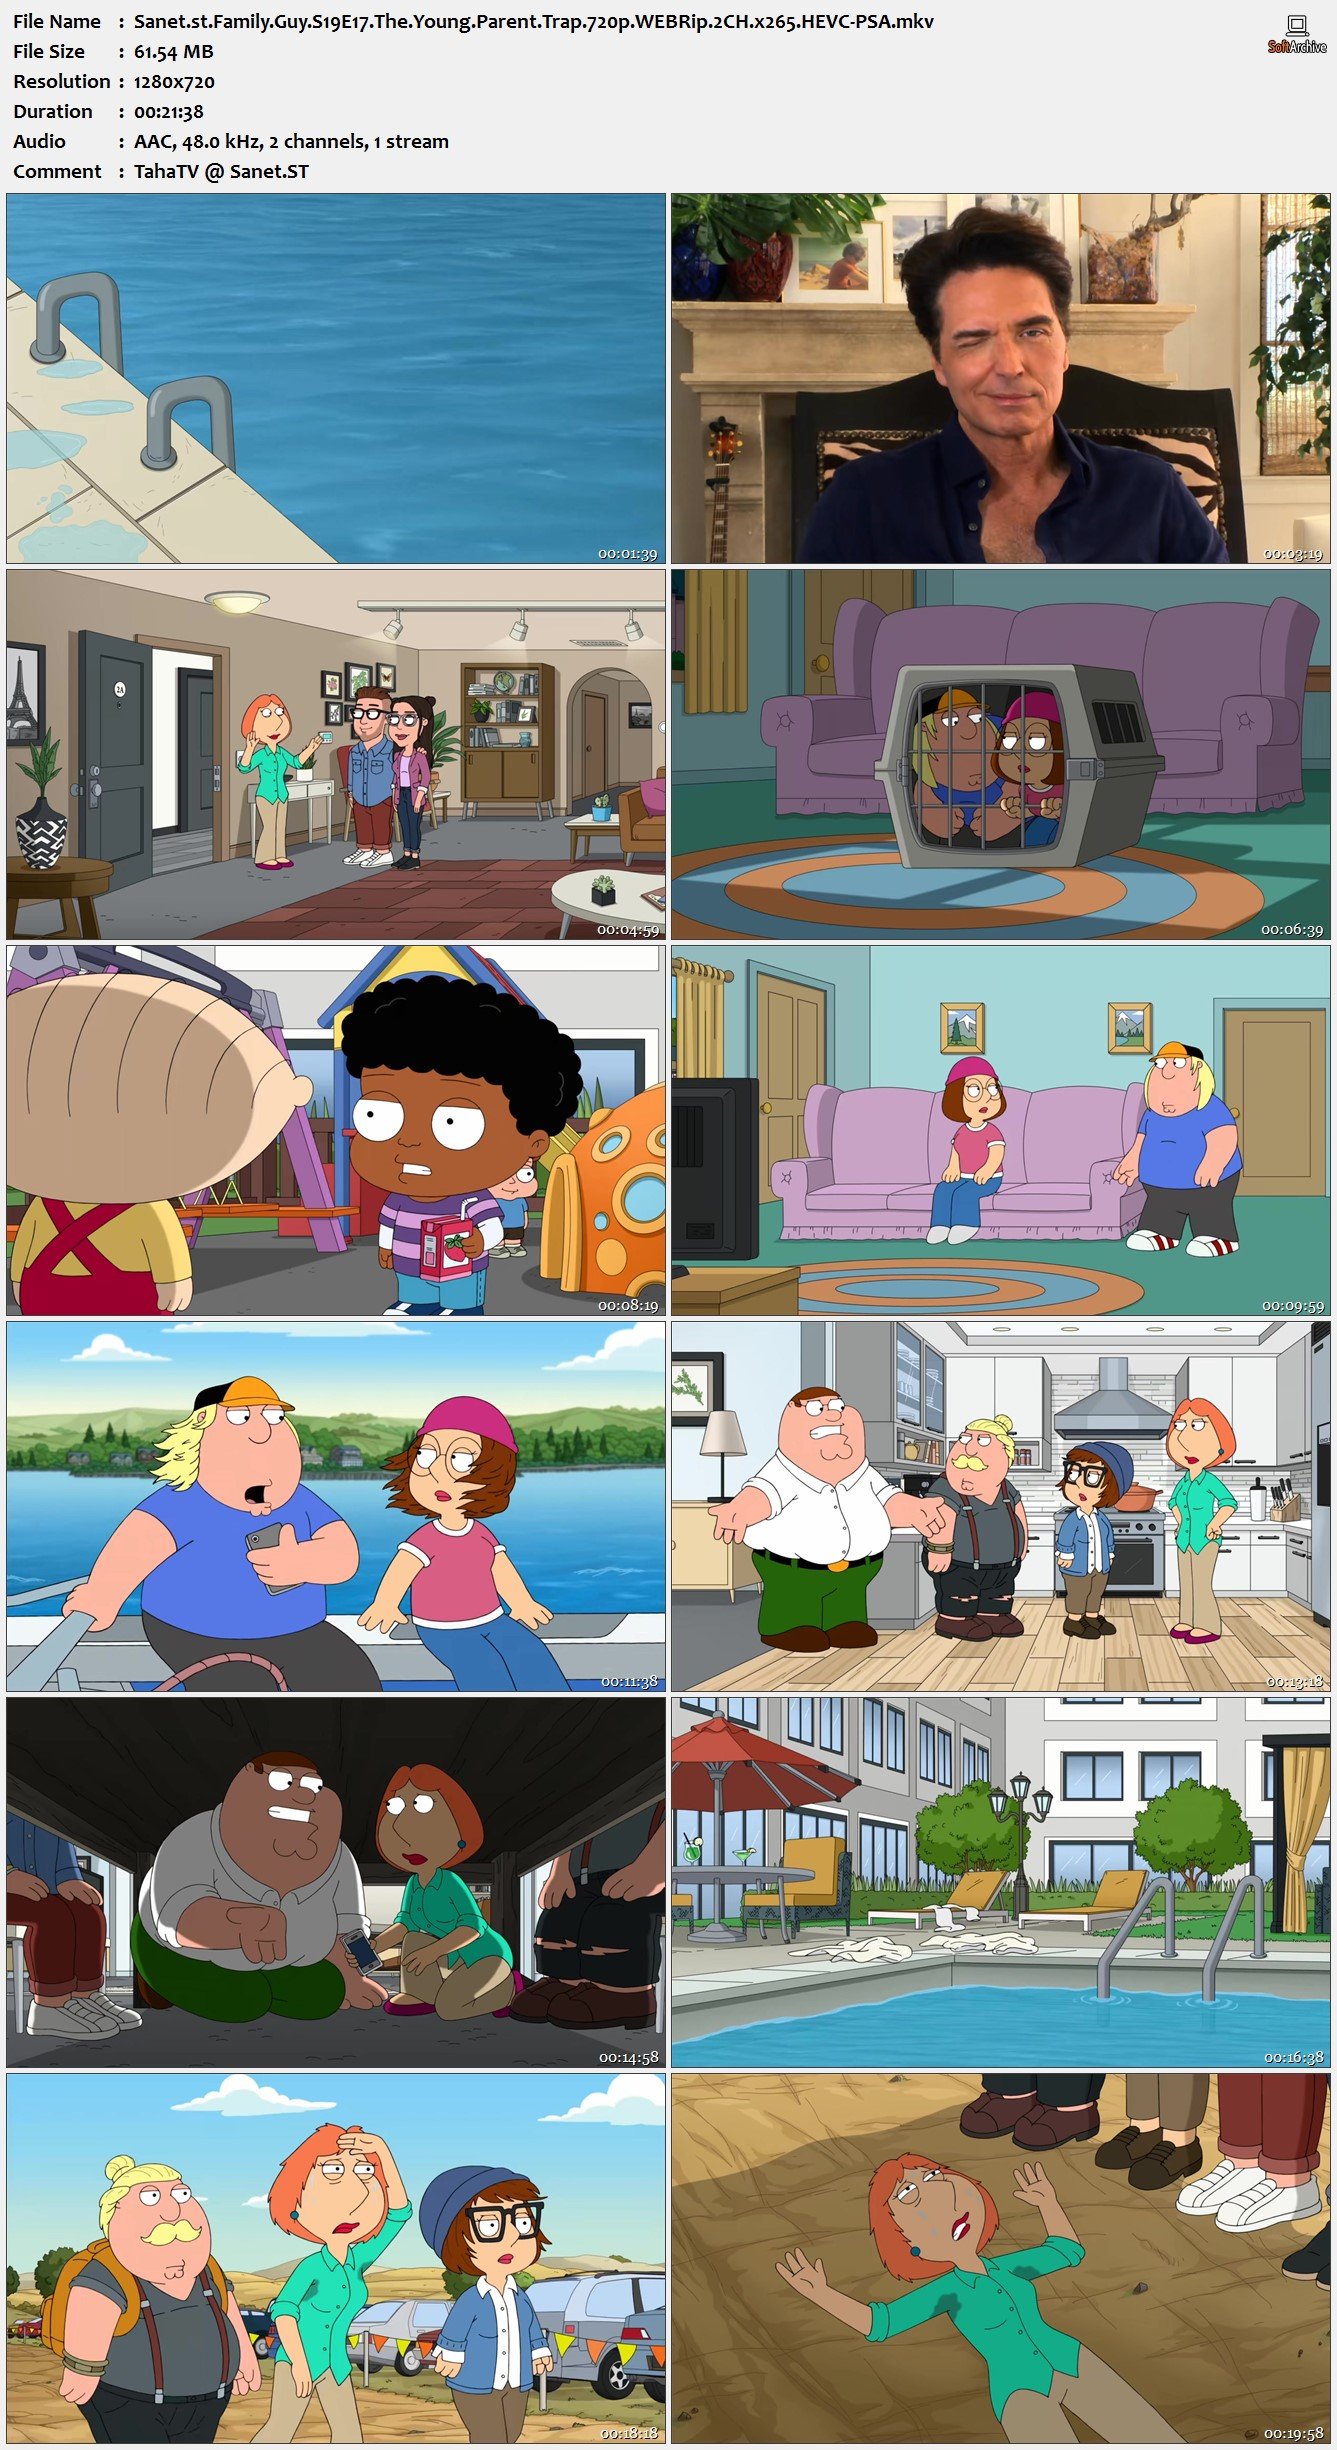 Download Family Guy S19E17 The Young Parent Trap 720p WEBRip 2CH x265